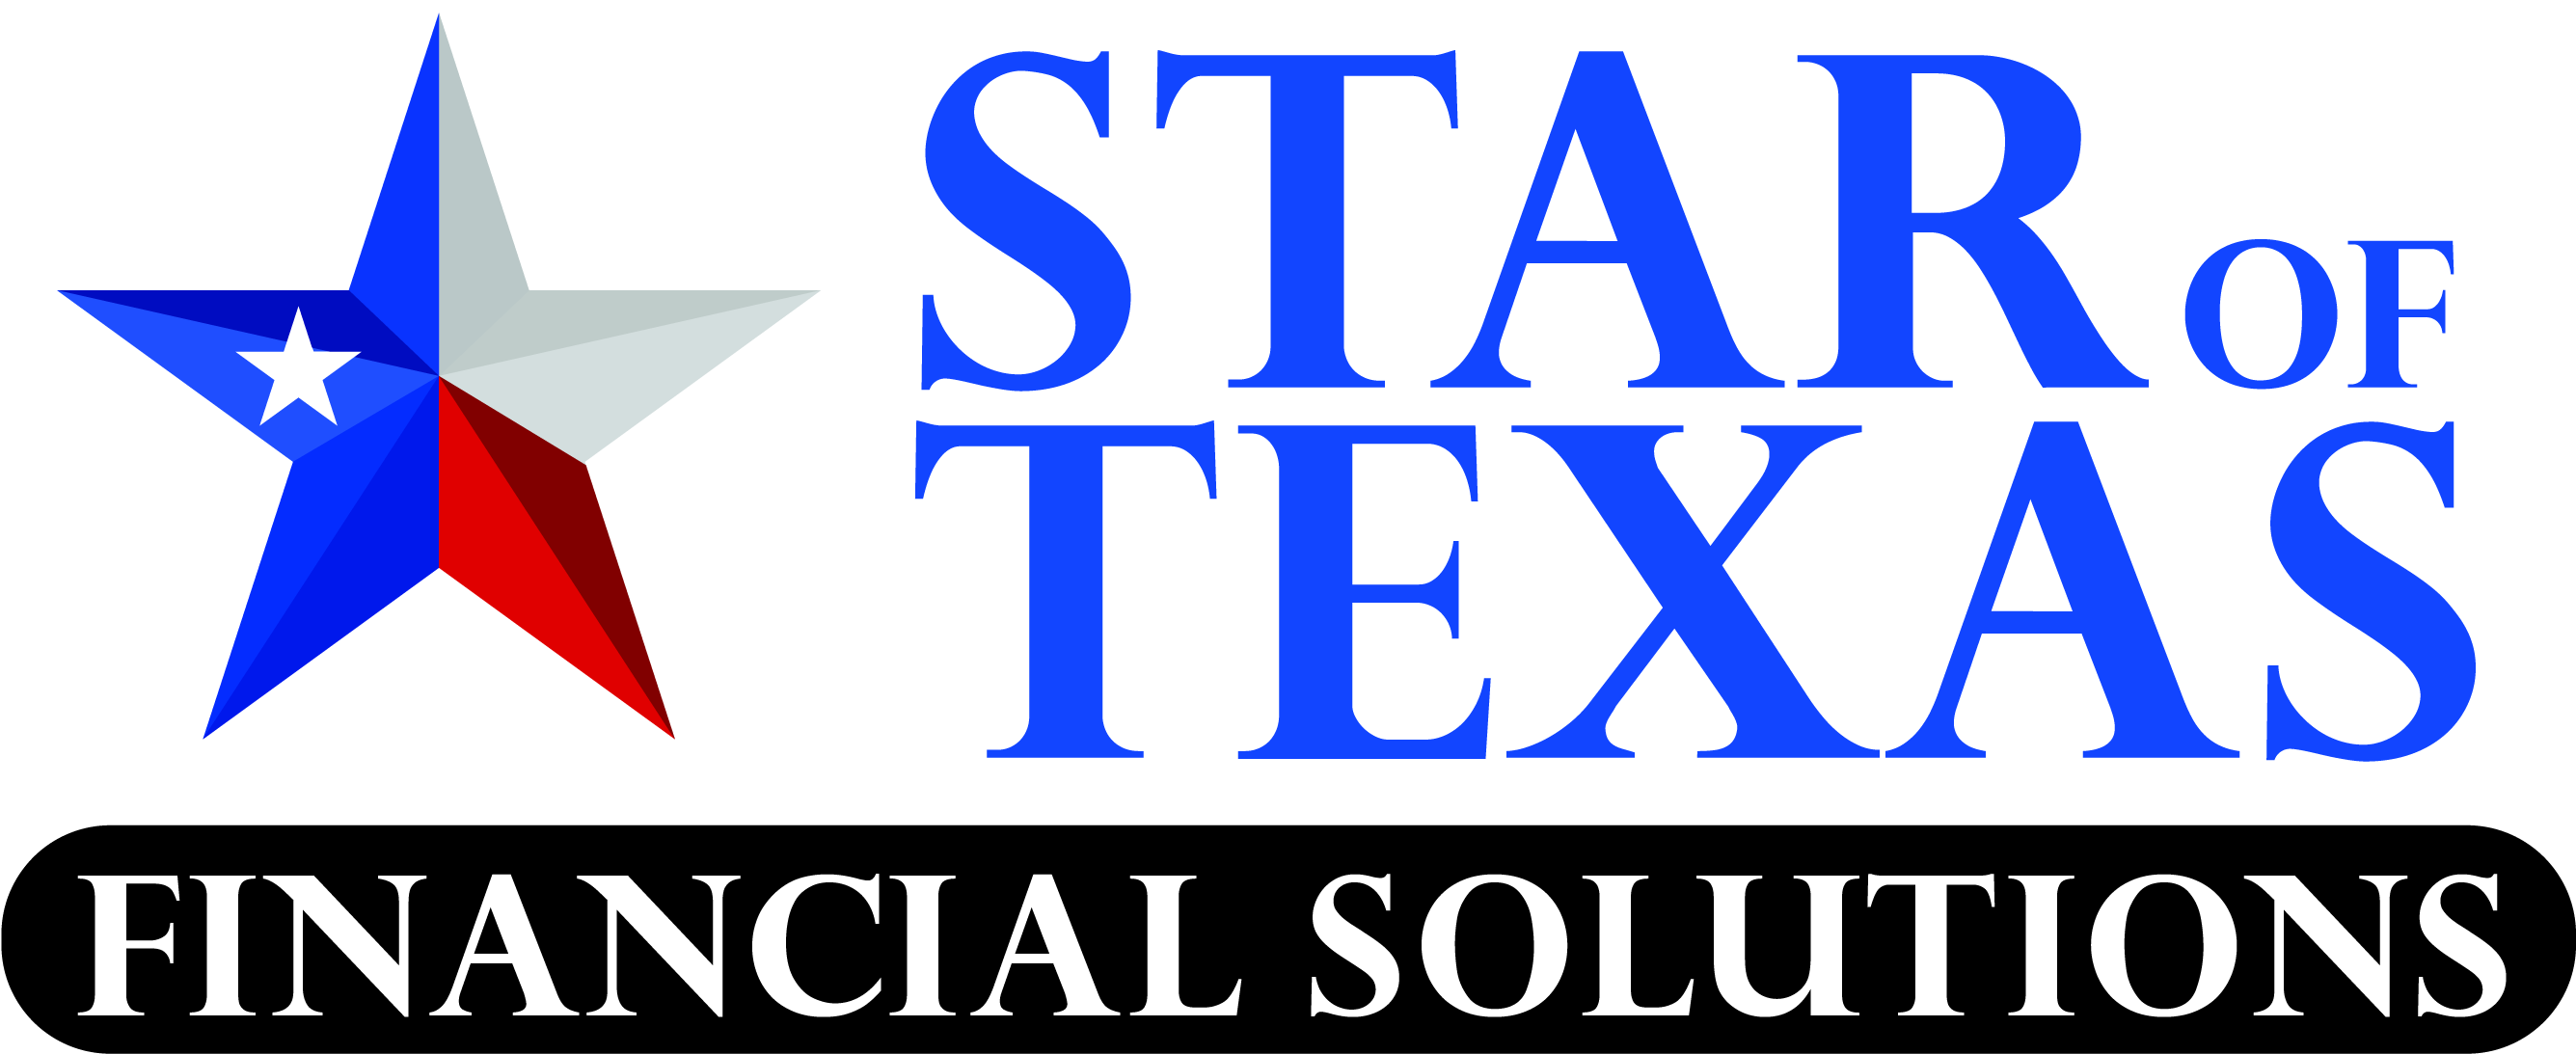 Search Results - Star Of Texas Financial Solutions (2999x1301)